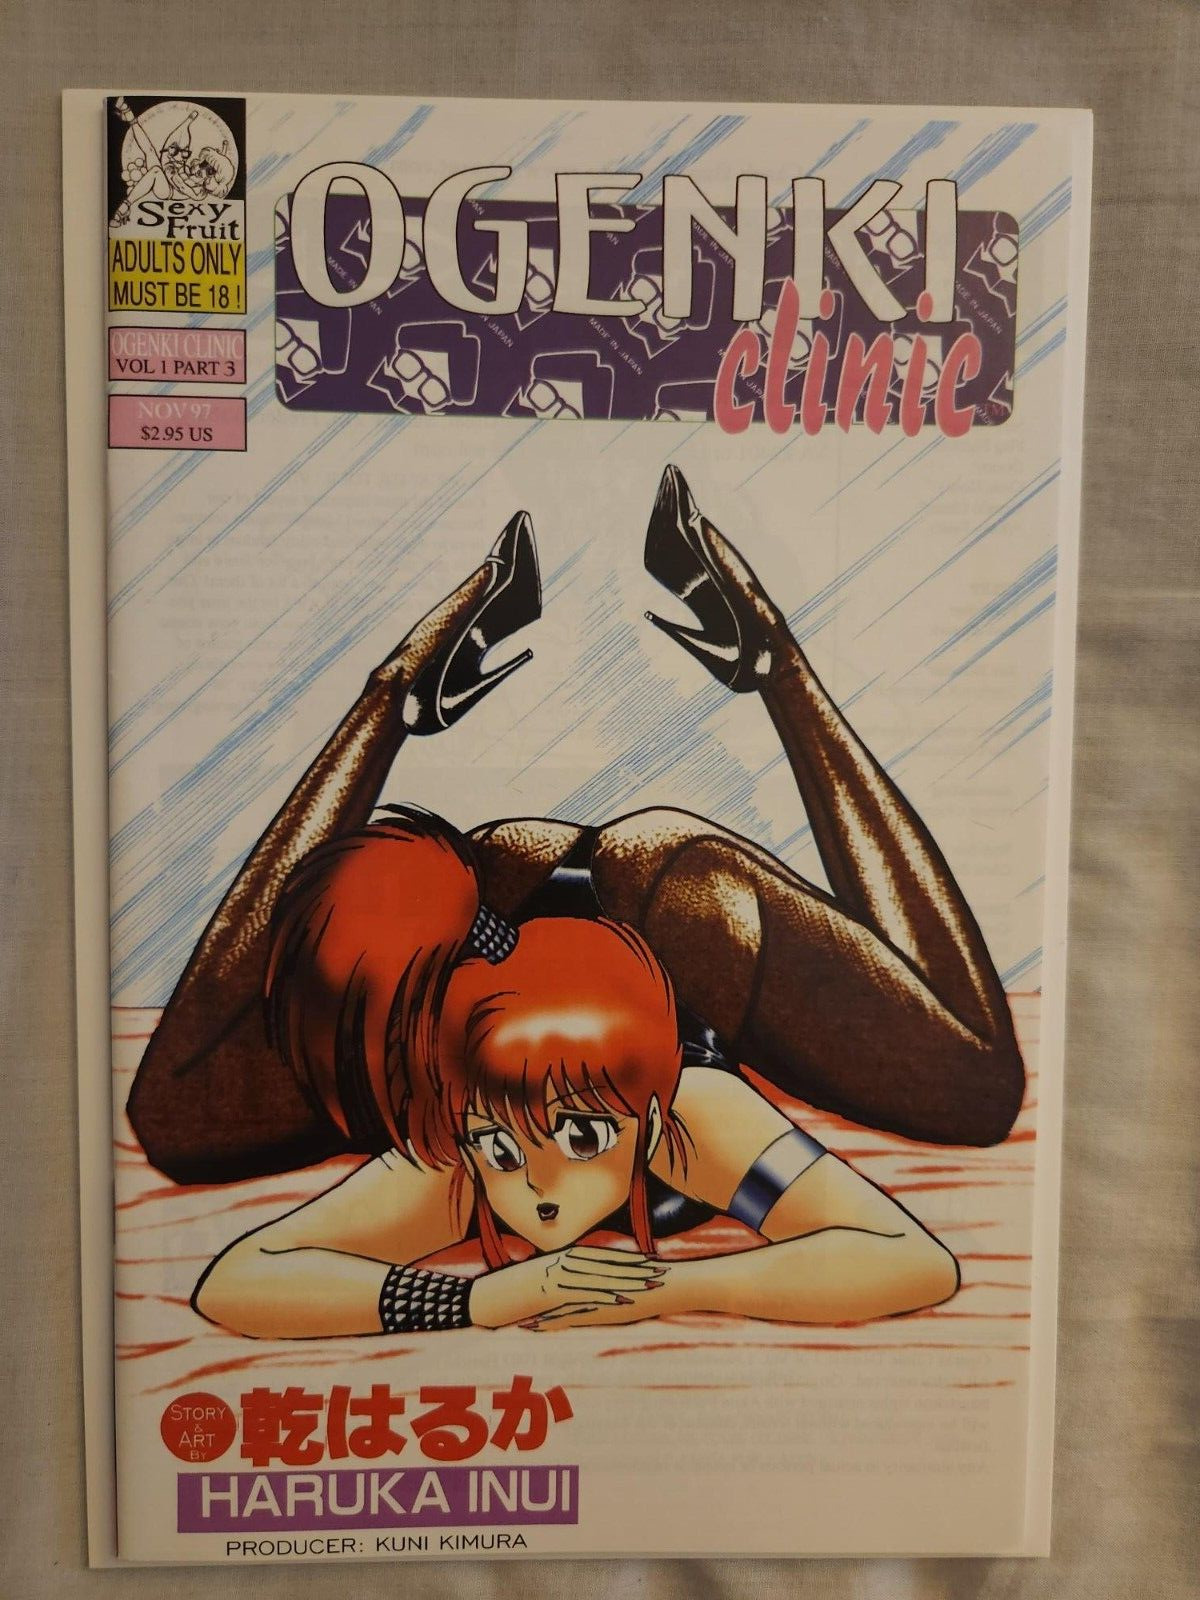 Ogenki Clinic Vol. 1 Part 3-Excellent Condition-Very Nice